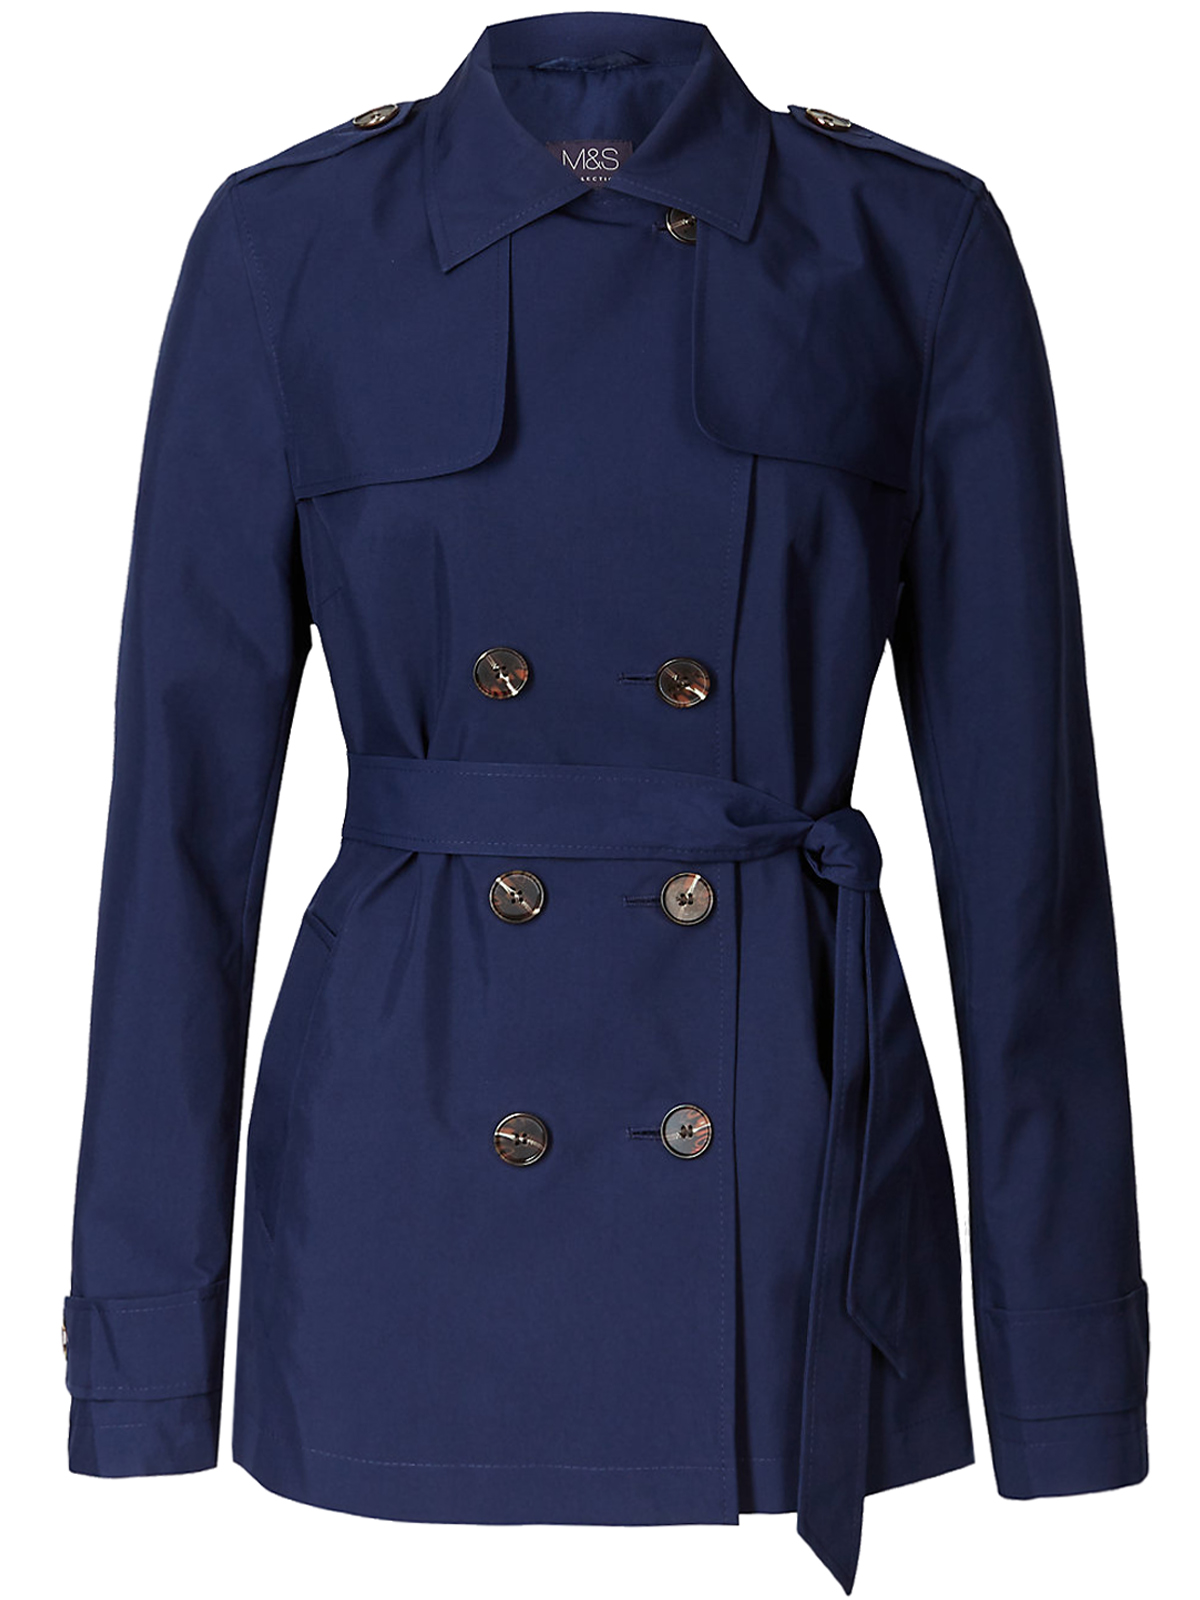 Marks and Spencer - - M&5 NAVY Belted Trench Coat with Stormwear - Size ...